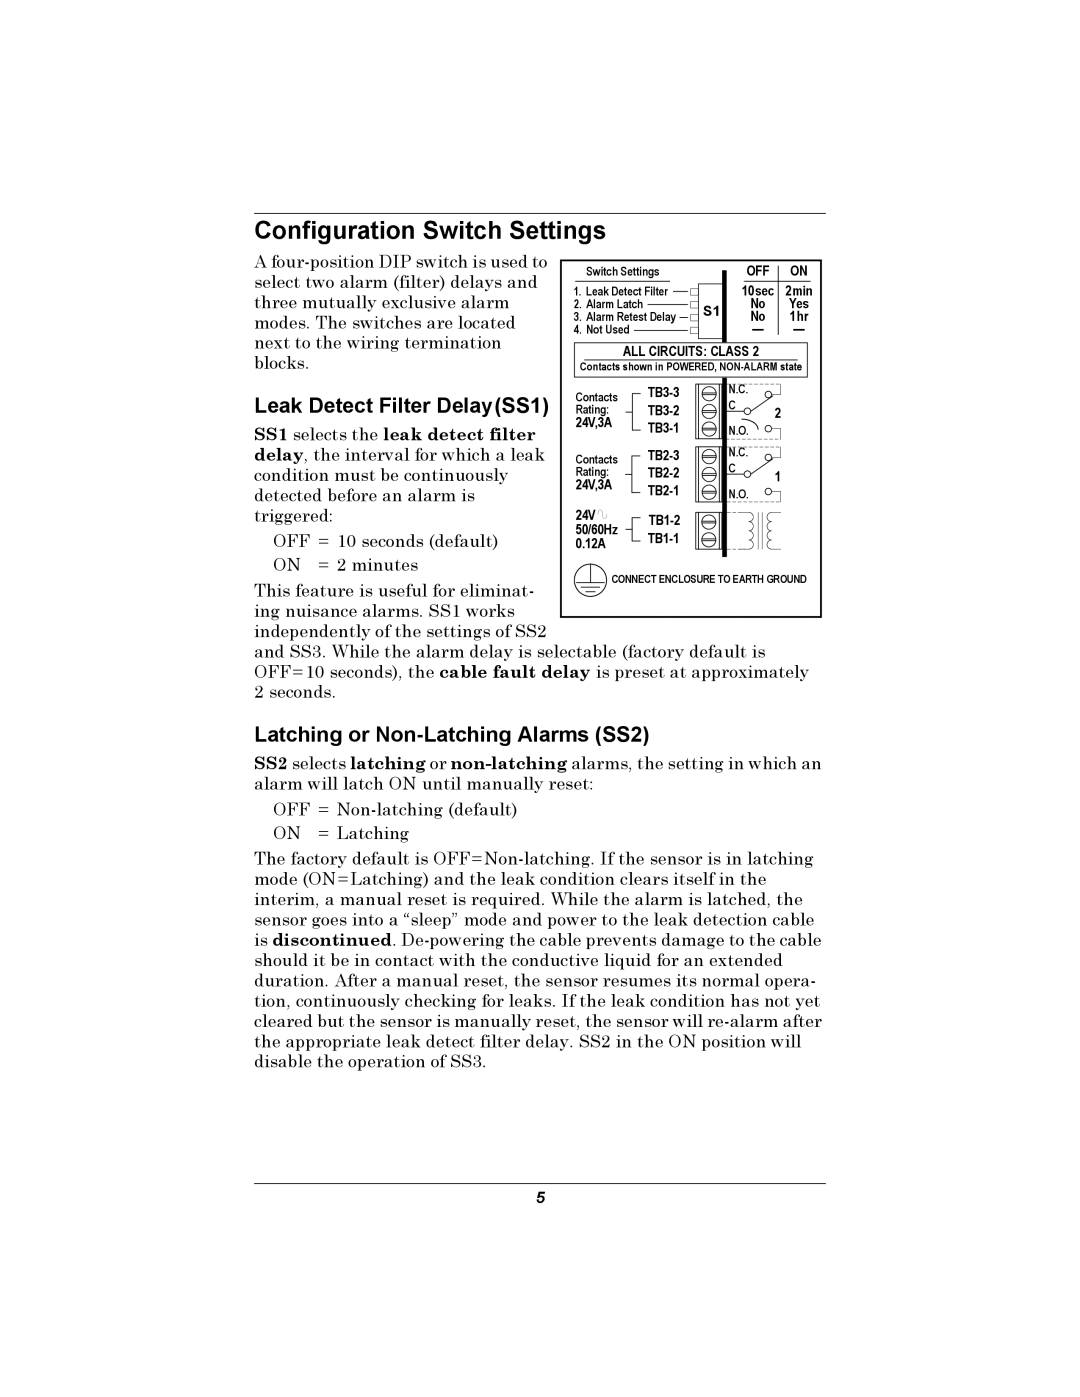 Emerson 460 Configuration Switch Settings, Leak Detect Filter DelaySS1, Latching or Non-LatchingAlarms SS2 